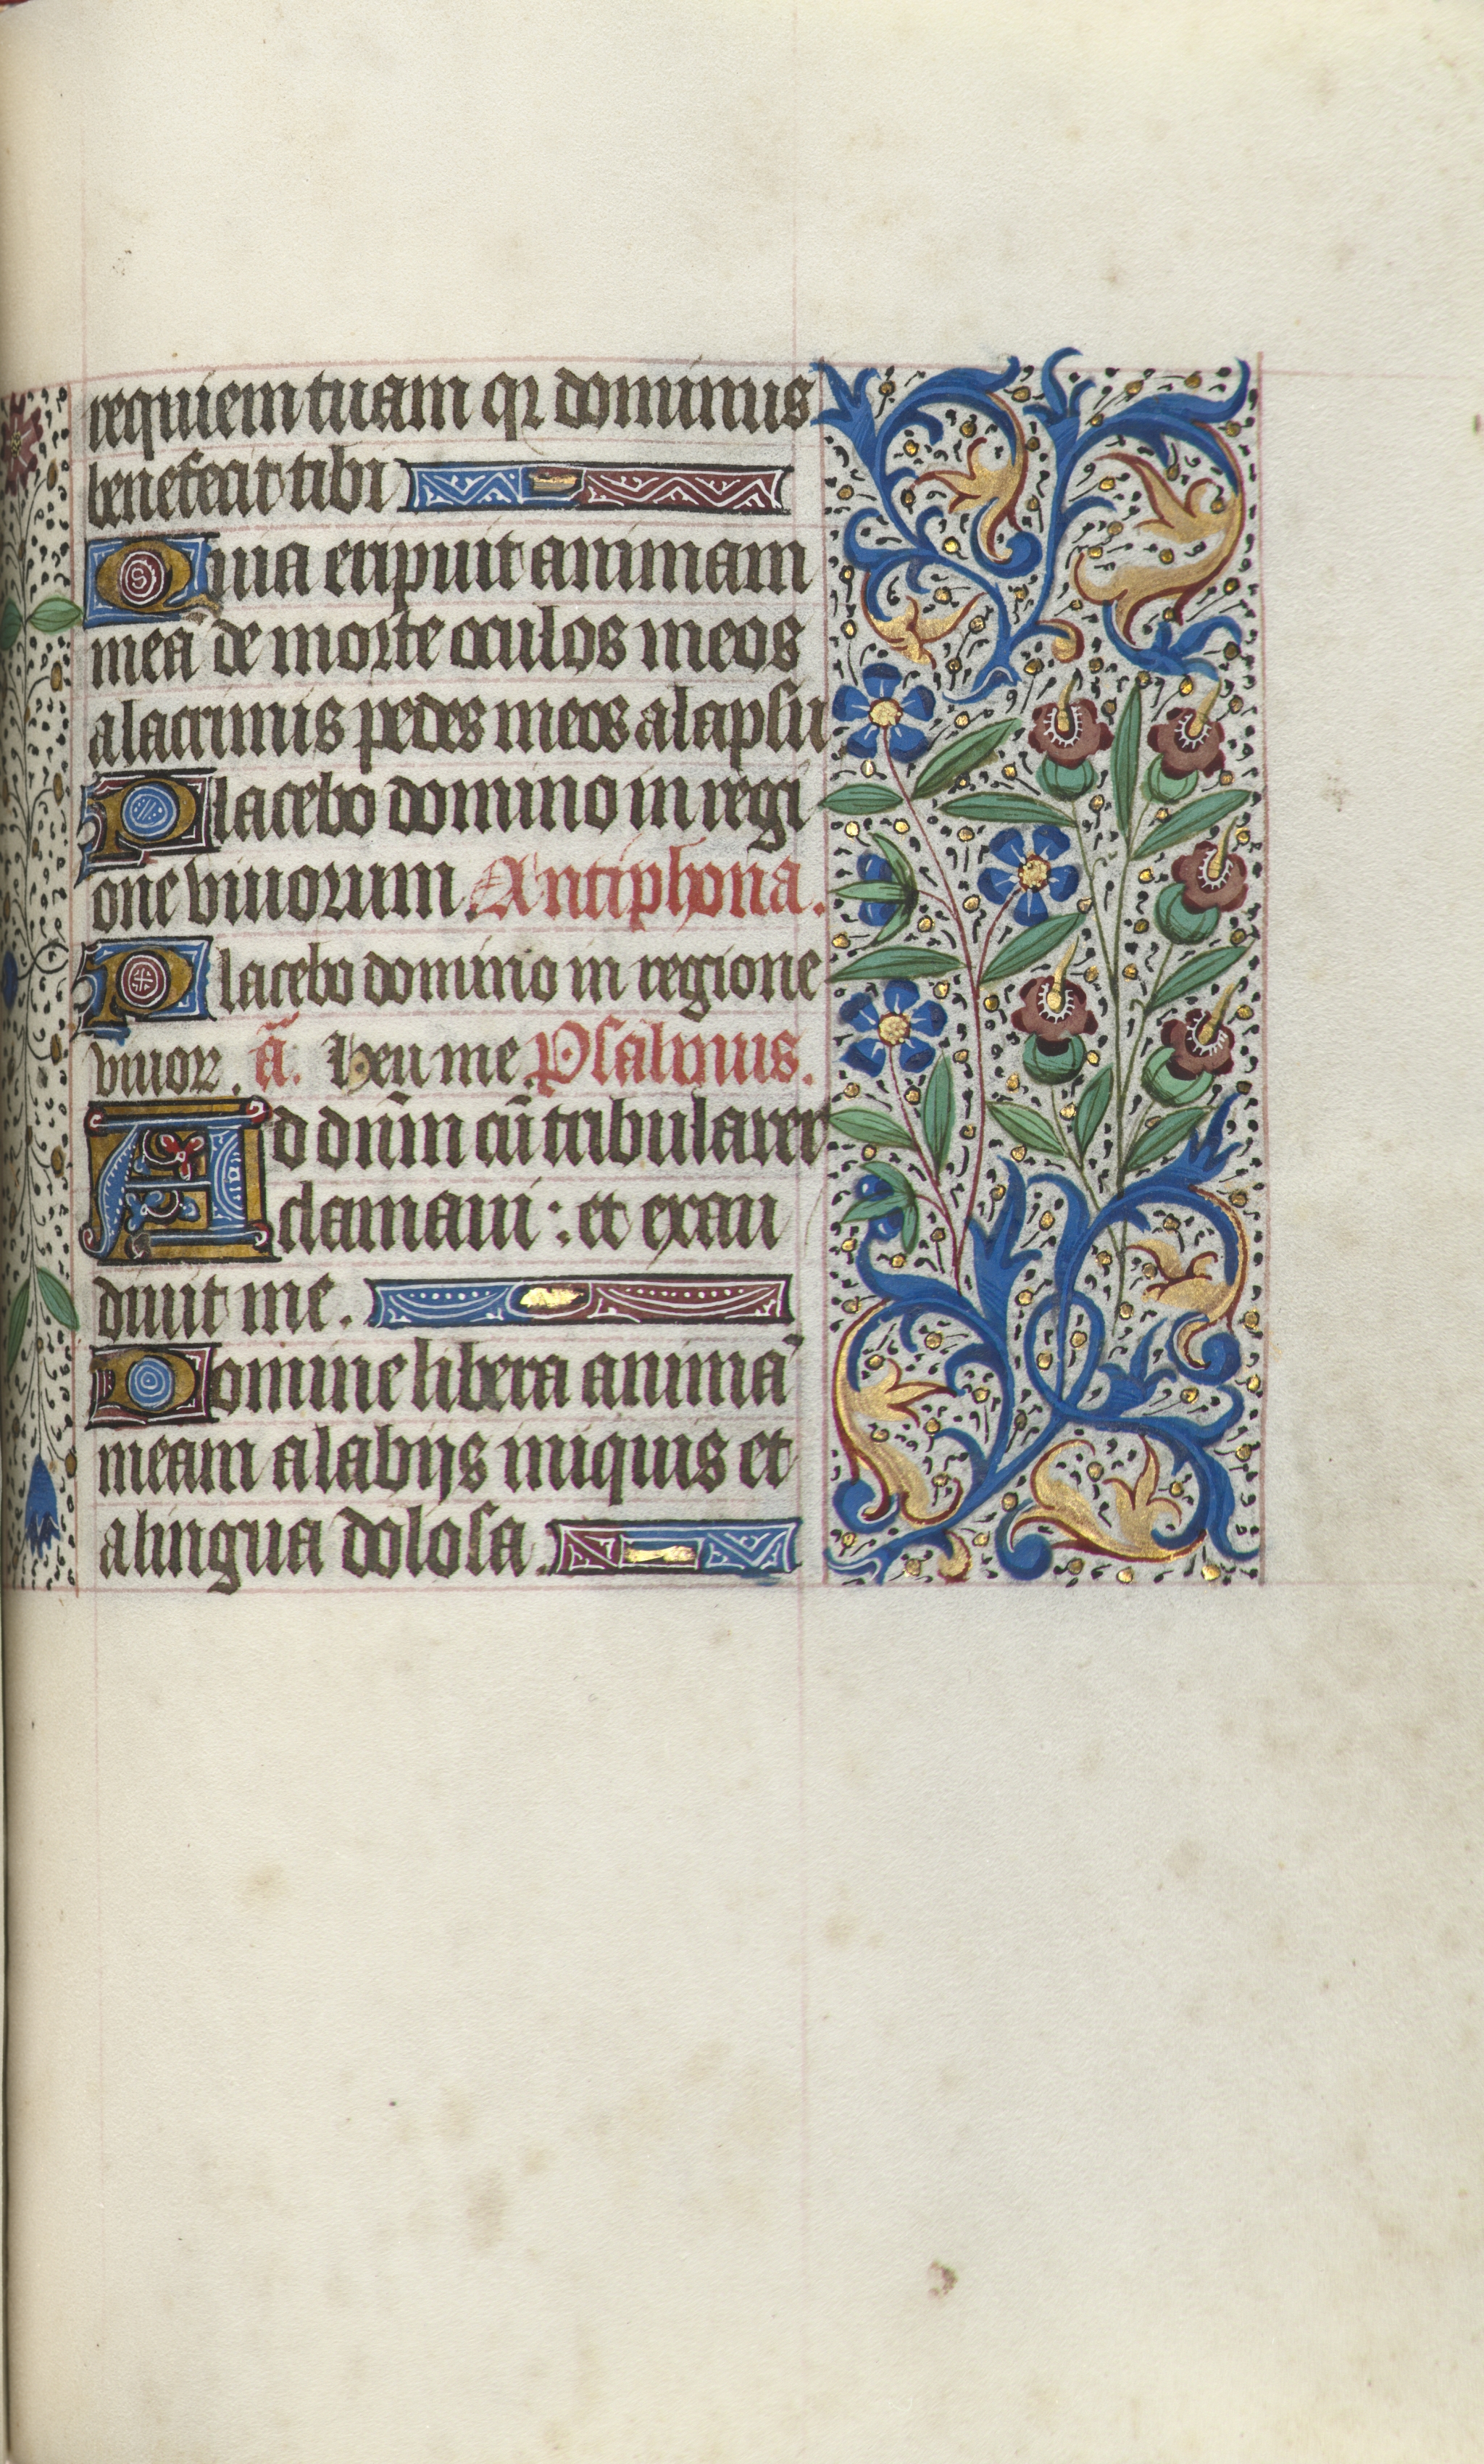 Book of Hours (Use of Rouen): fol. 104r